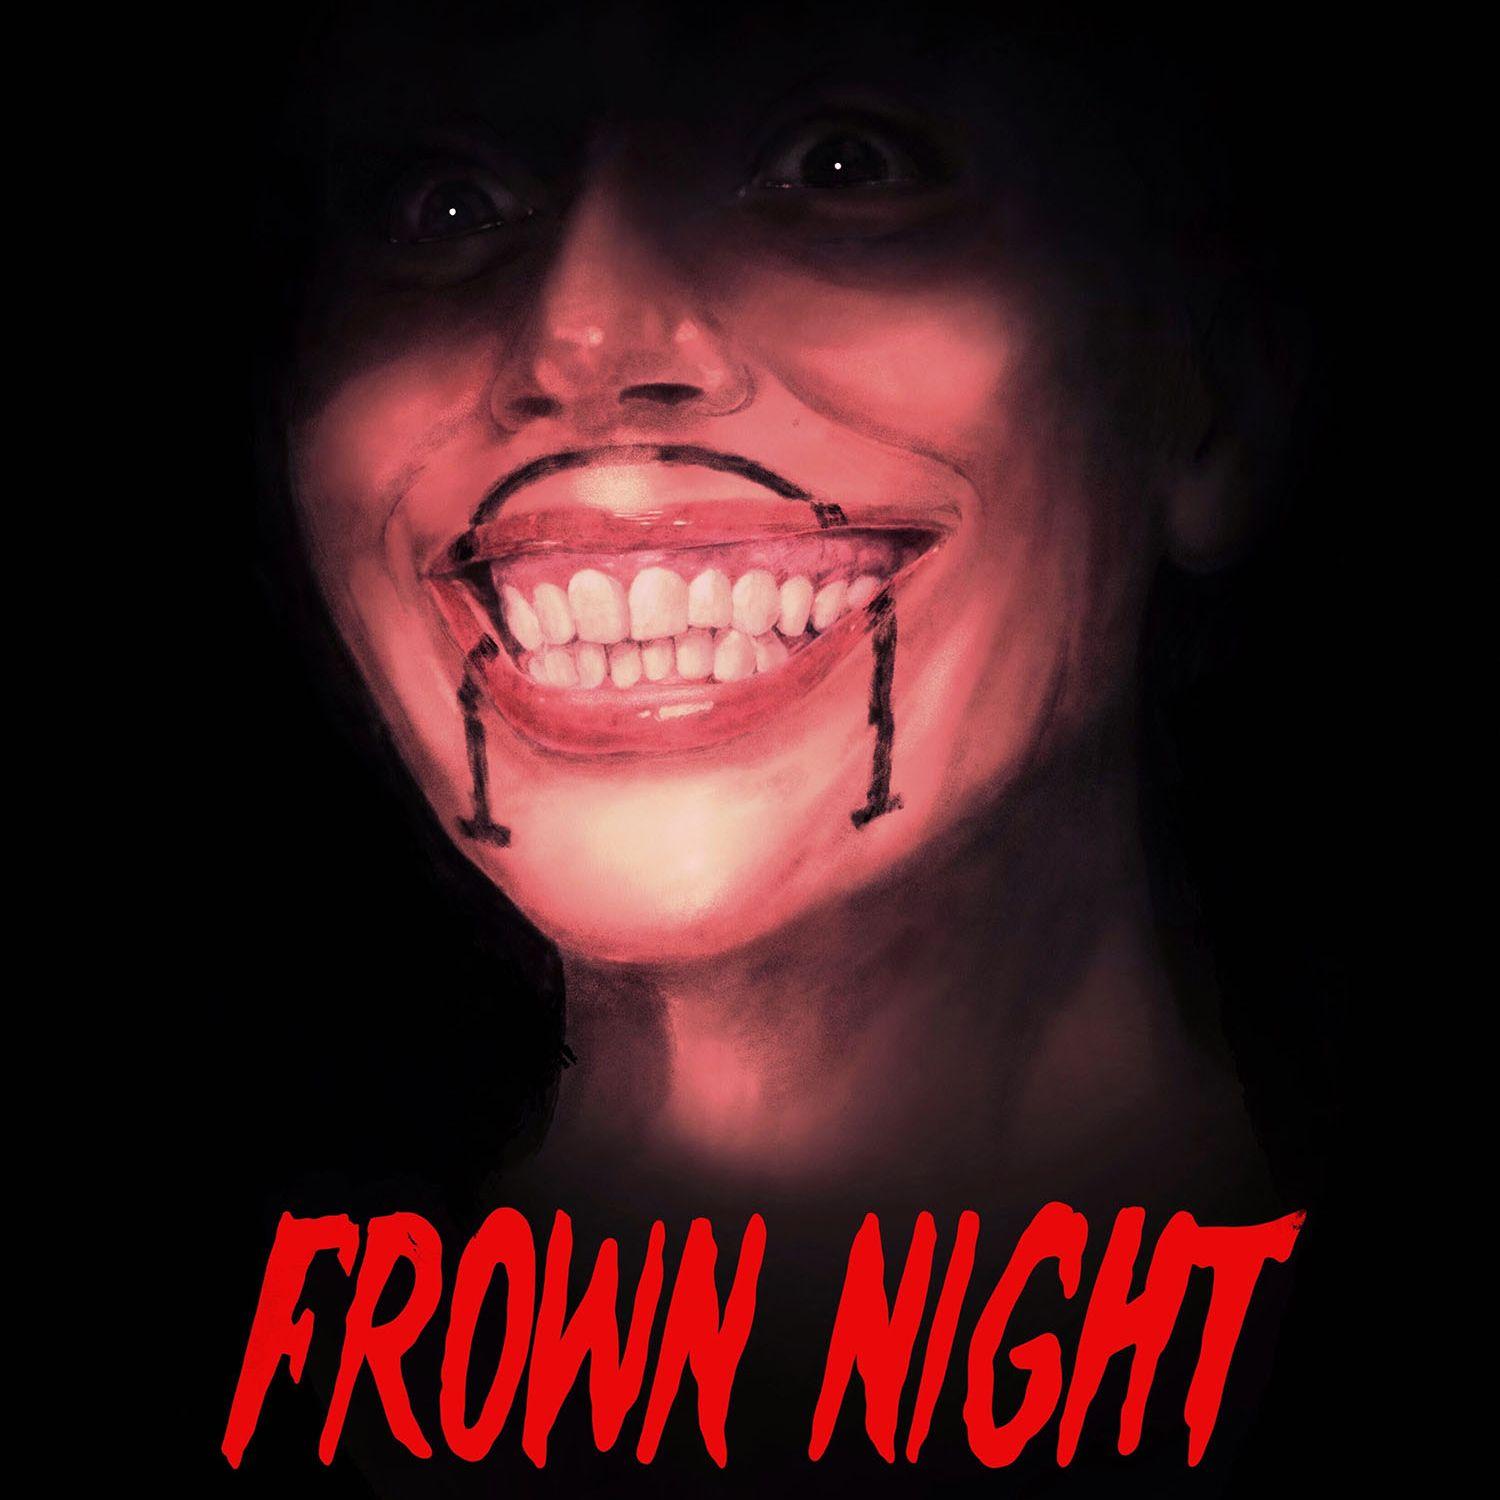 Thumbnail for "237 - Frown Night".